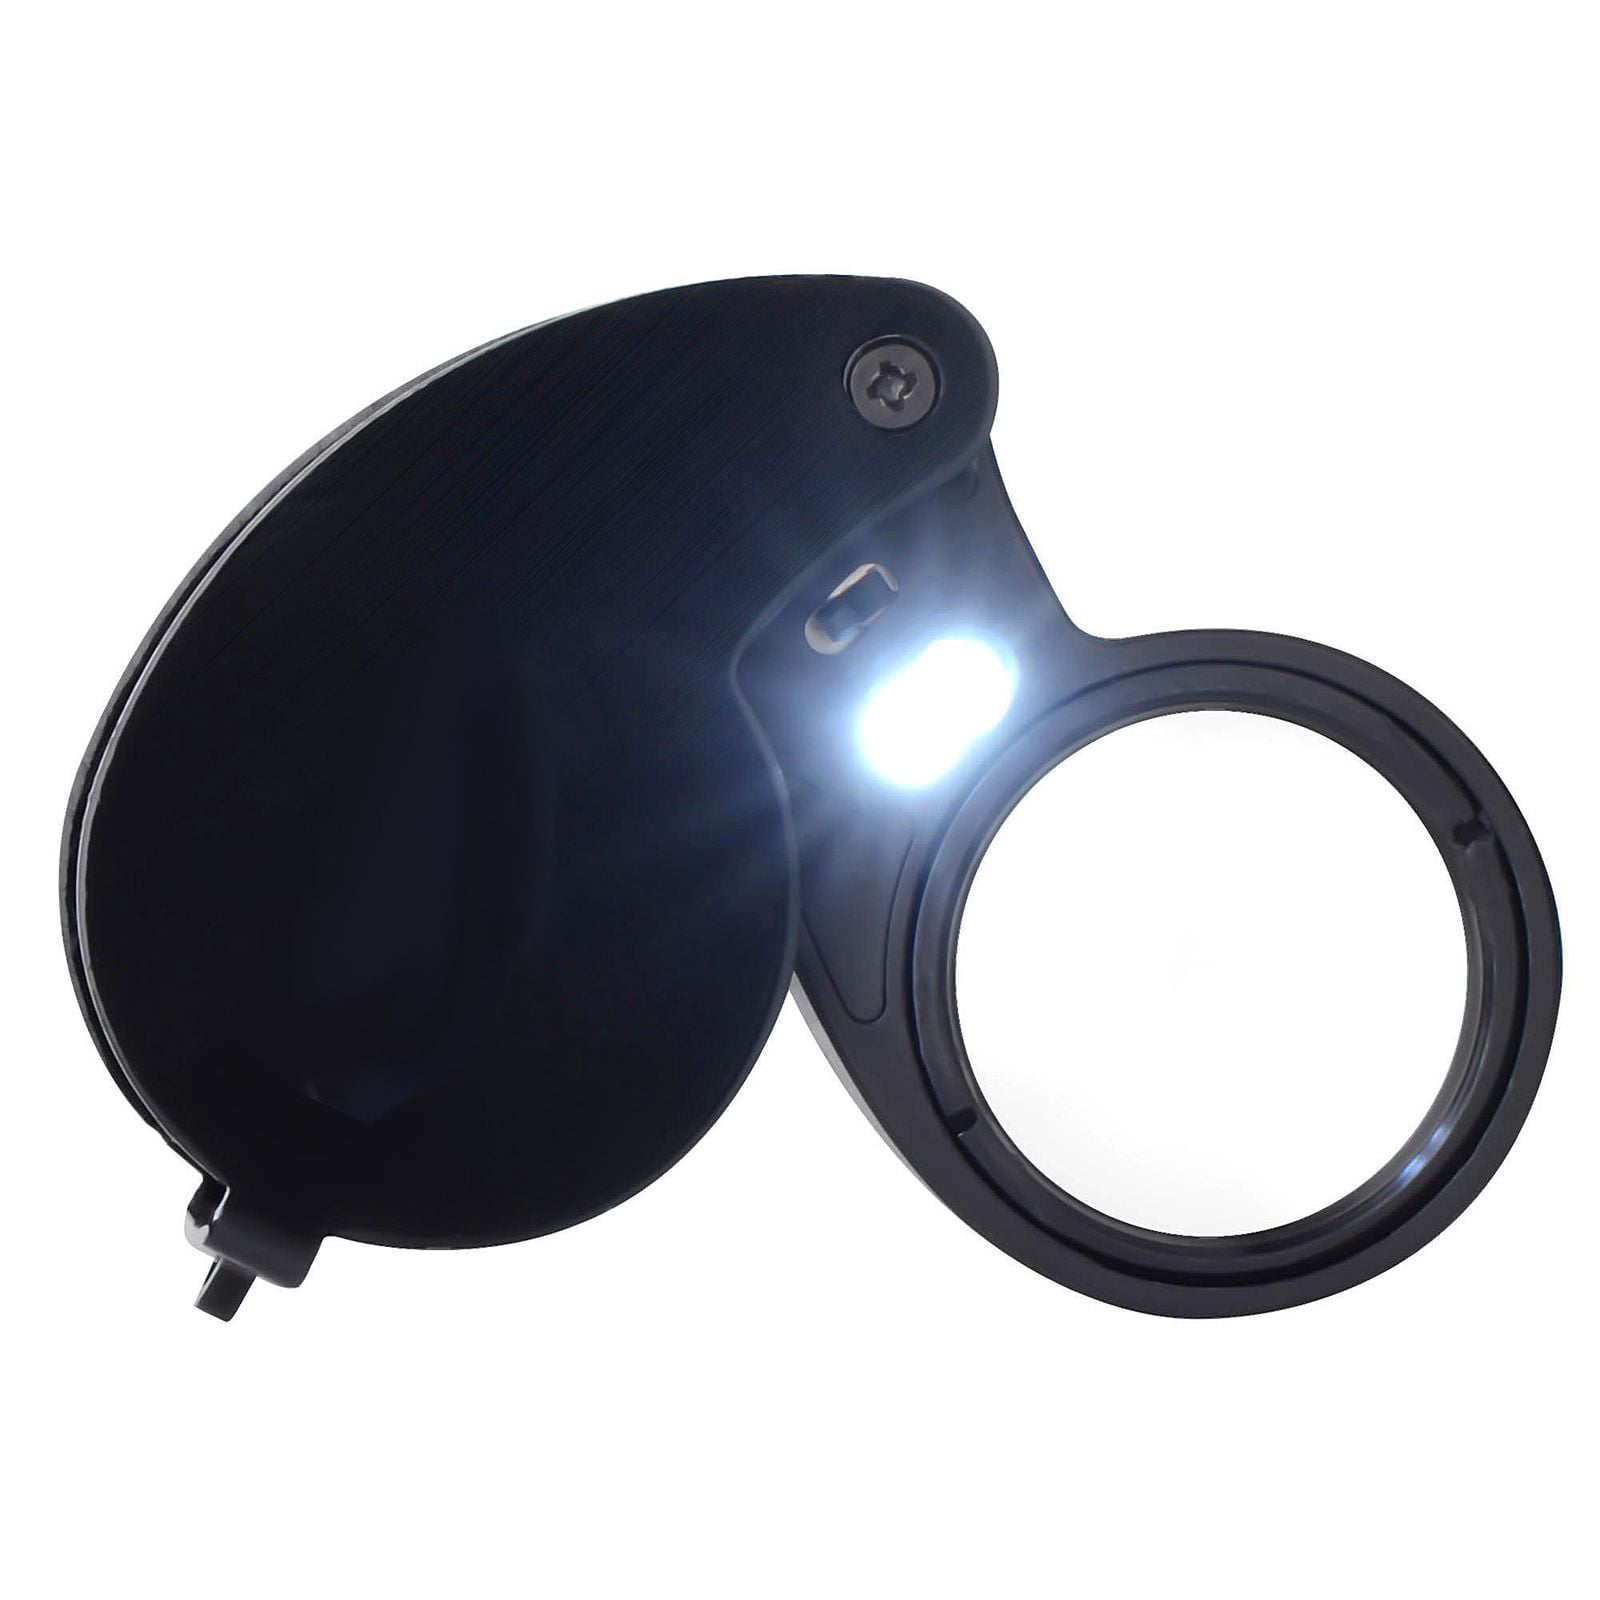 40x 25mm Glass LED Light Magnifying Magnifier Jeweler Eye Jewelry Loupe Loop Hot